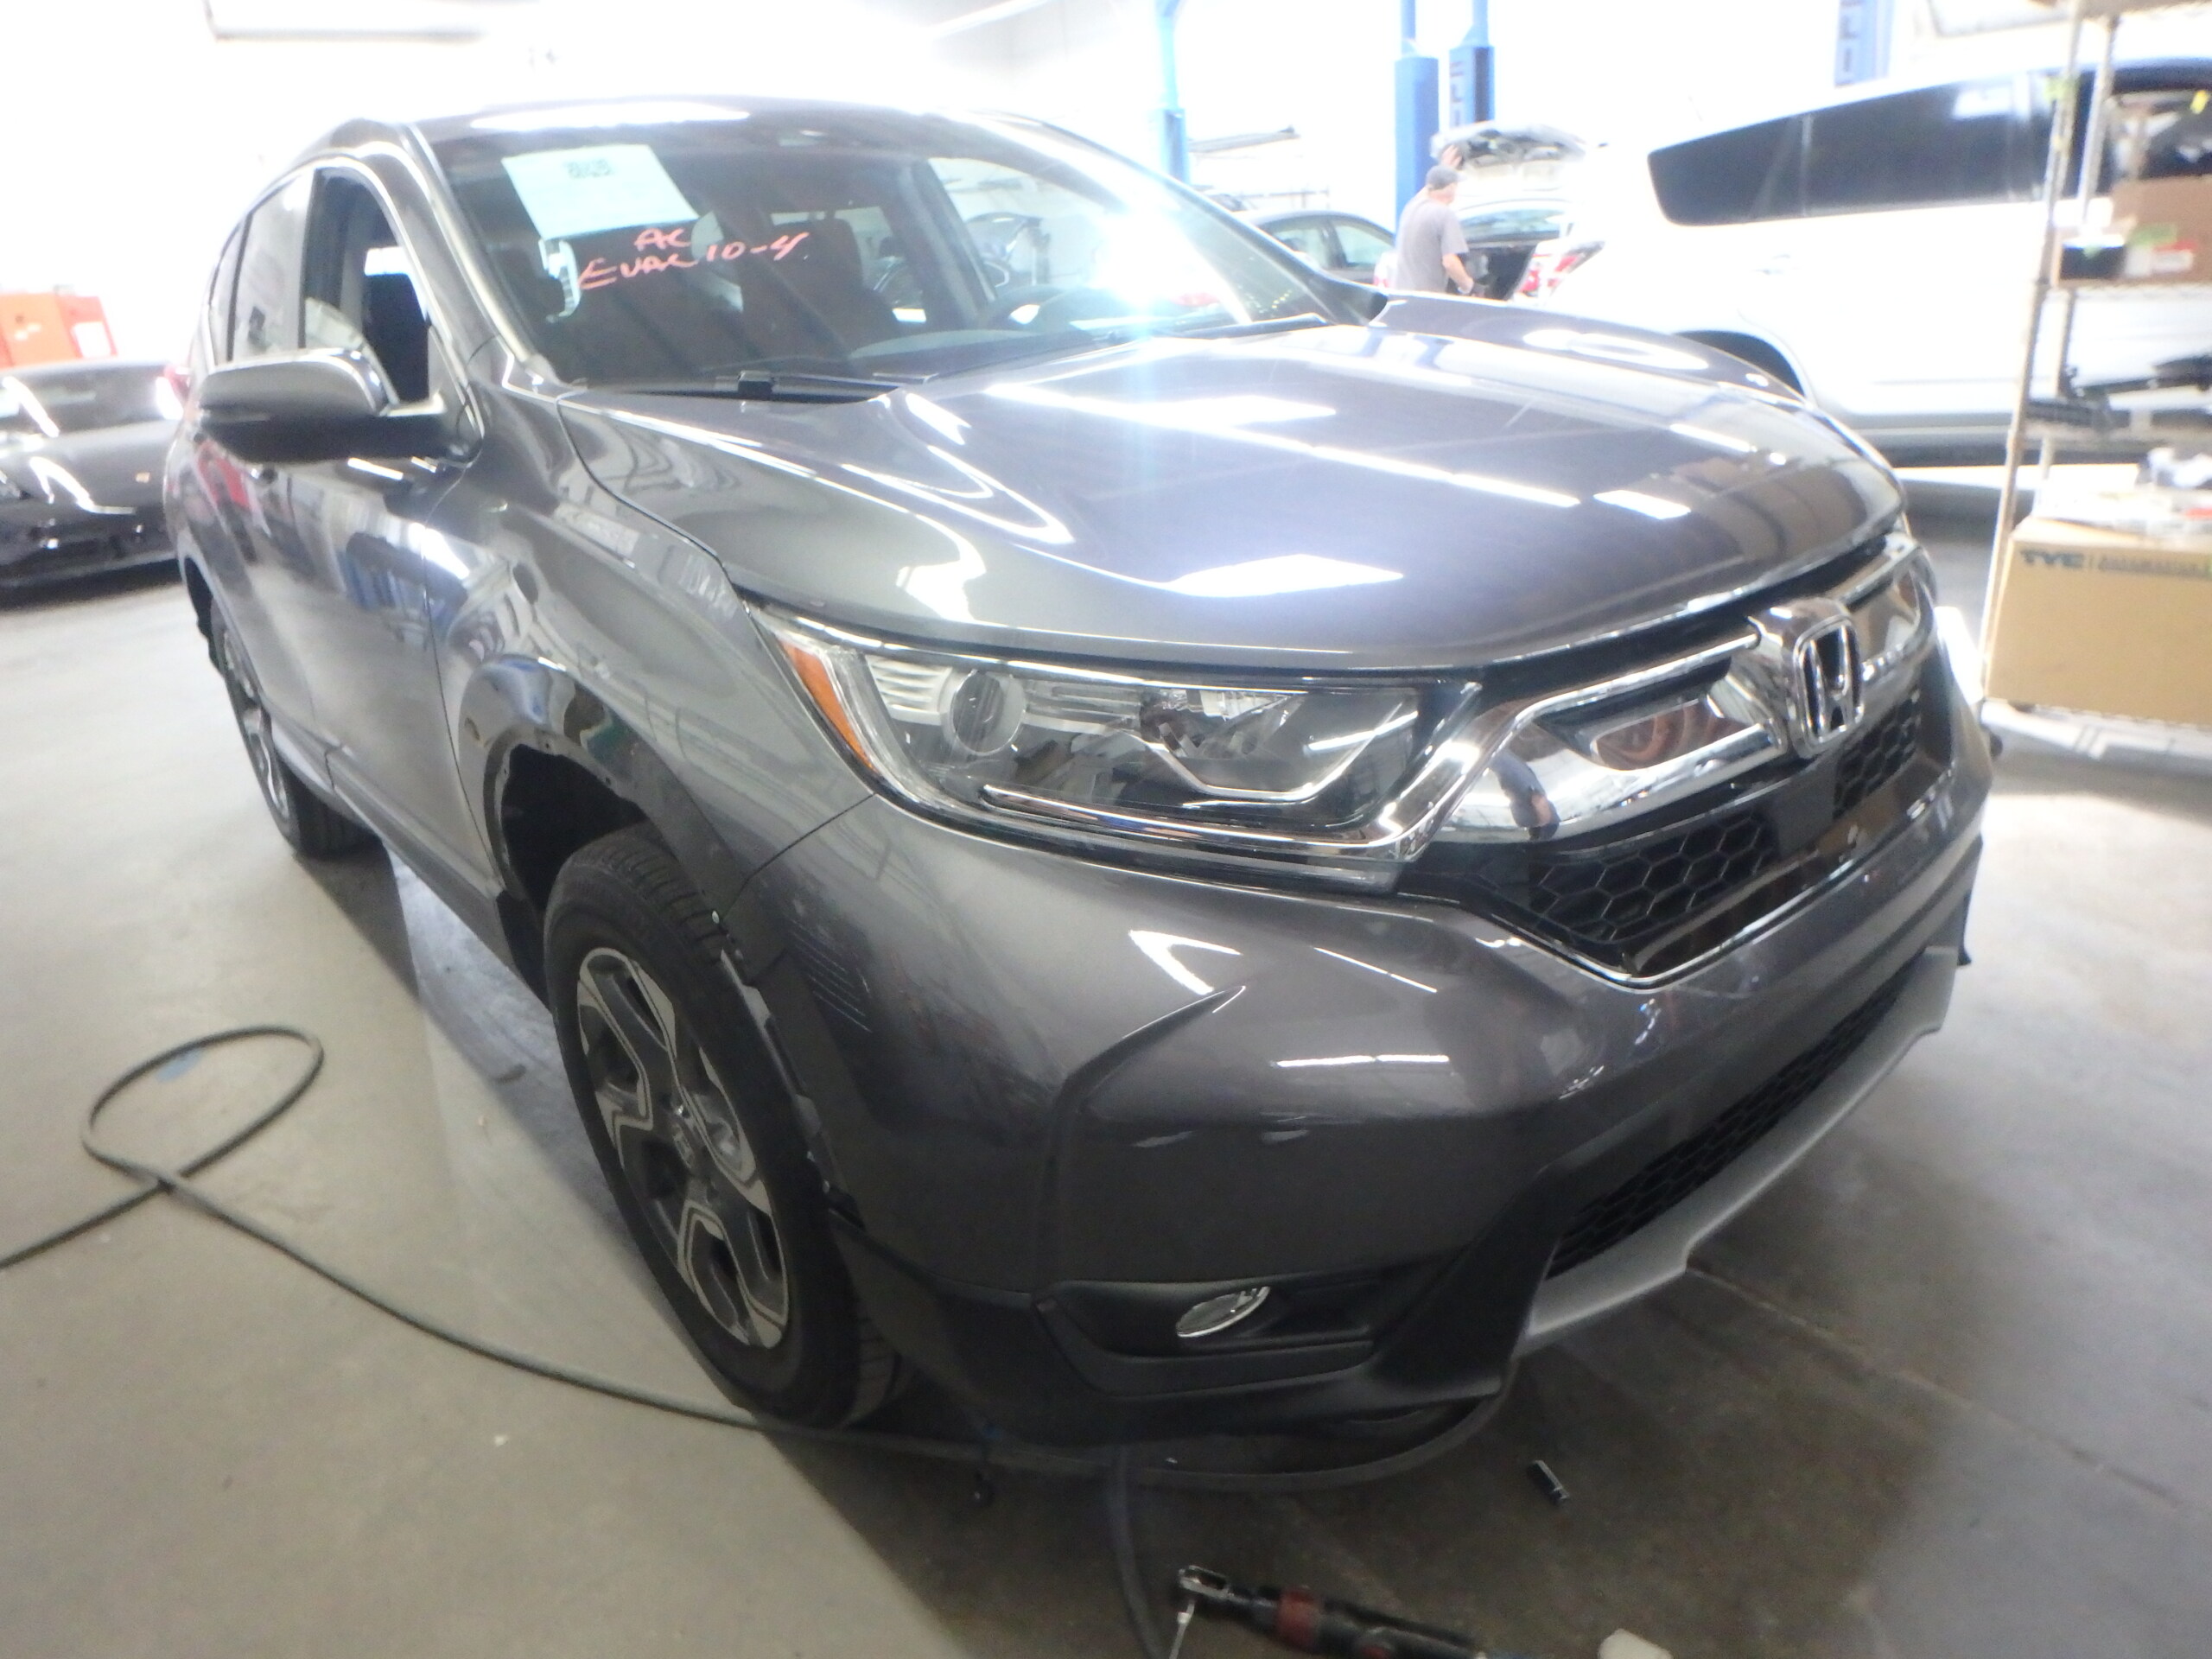 completed honda crv by Anchor Auto body shop